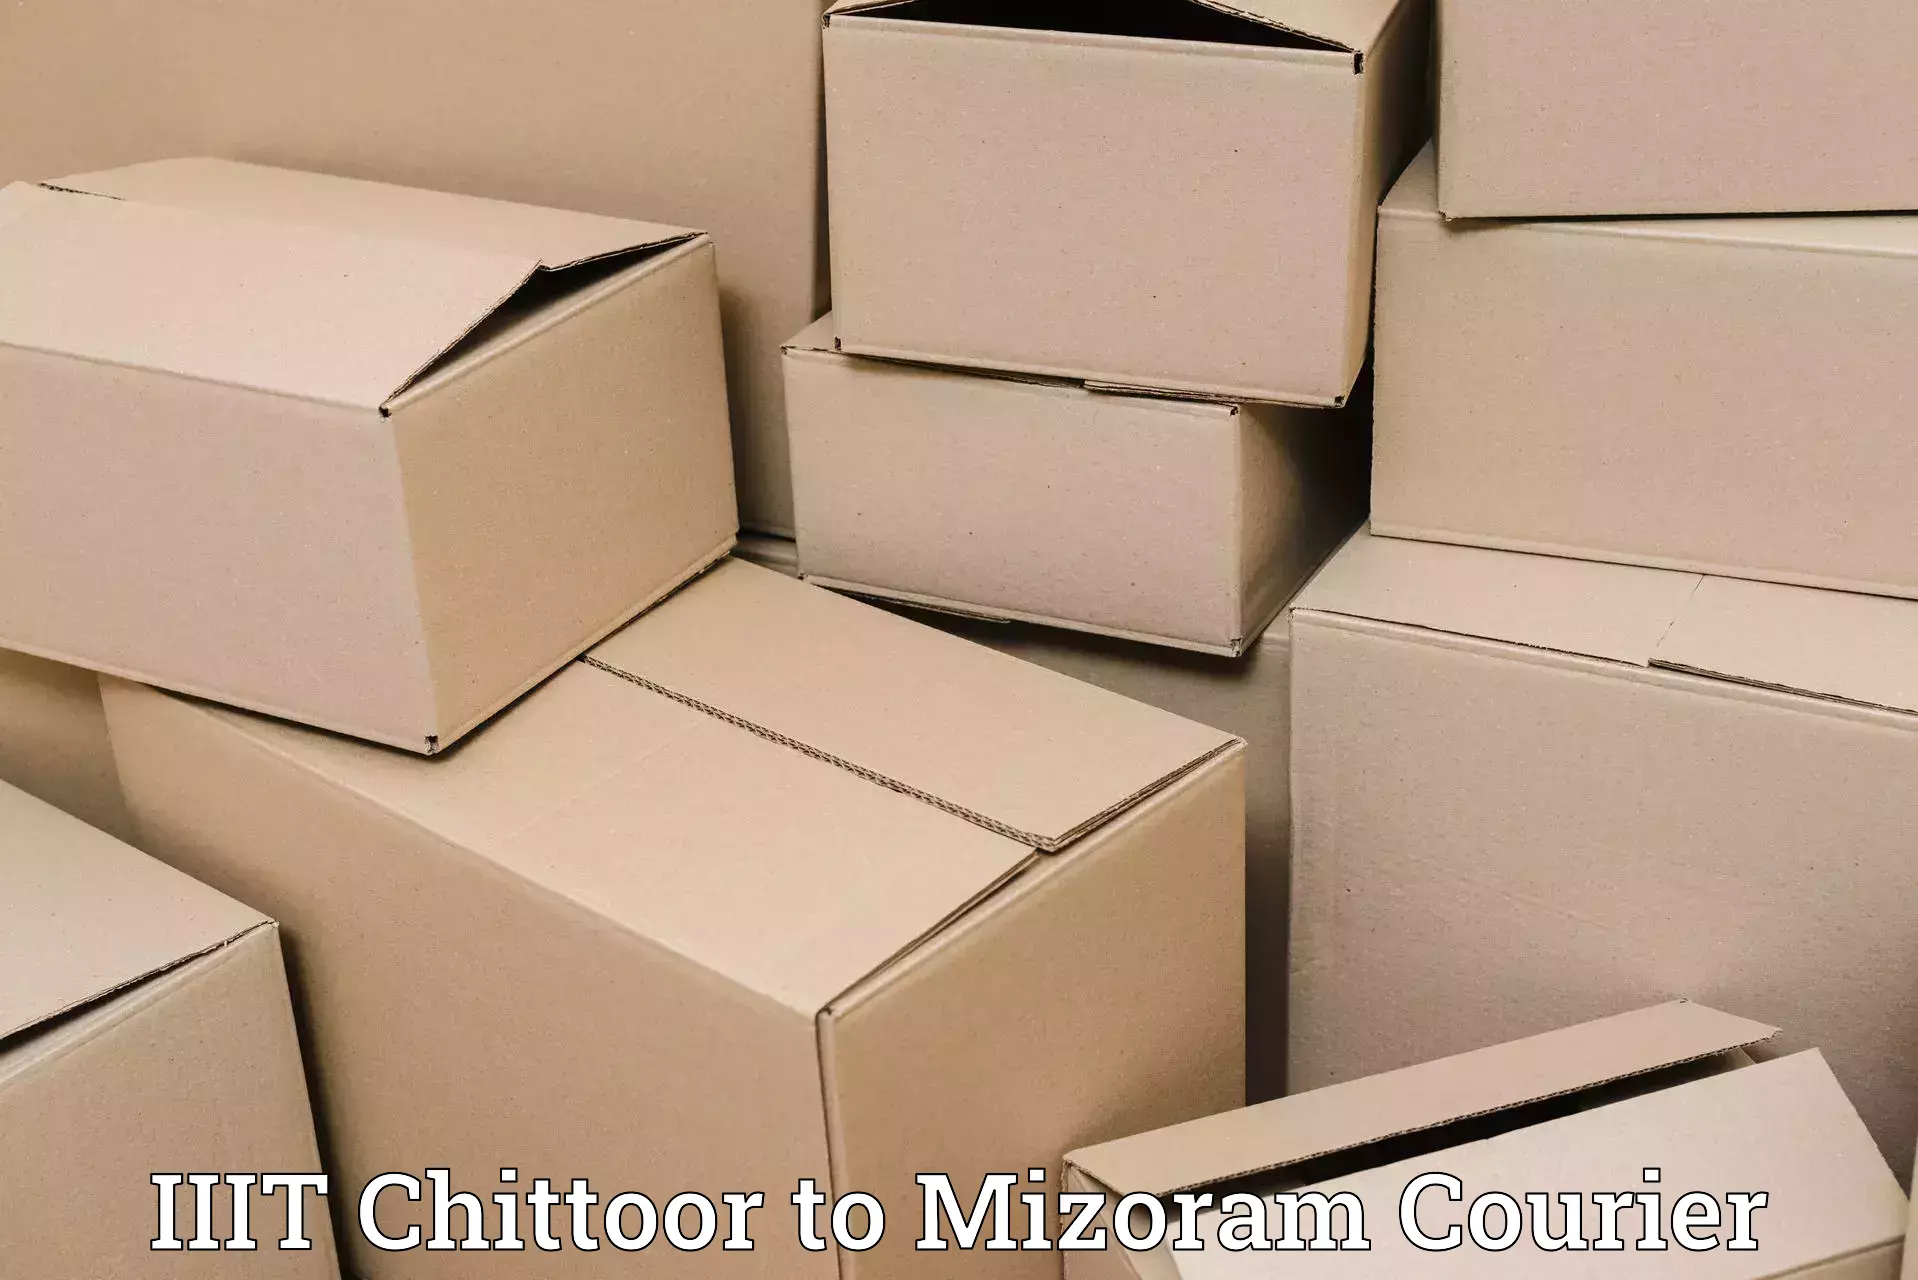 Specialized shipment handling in IIIT Chittoor to NIT Aizawl